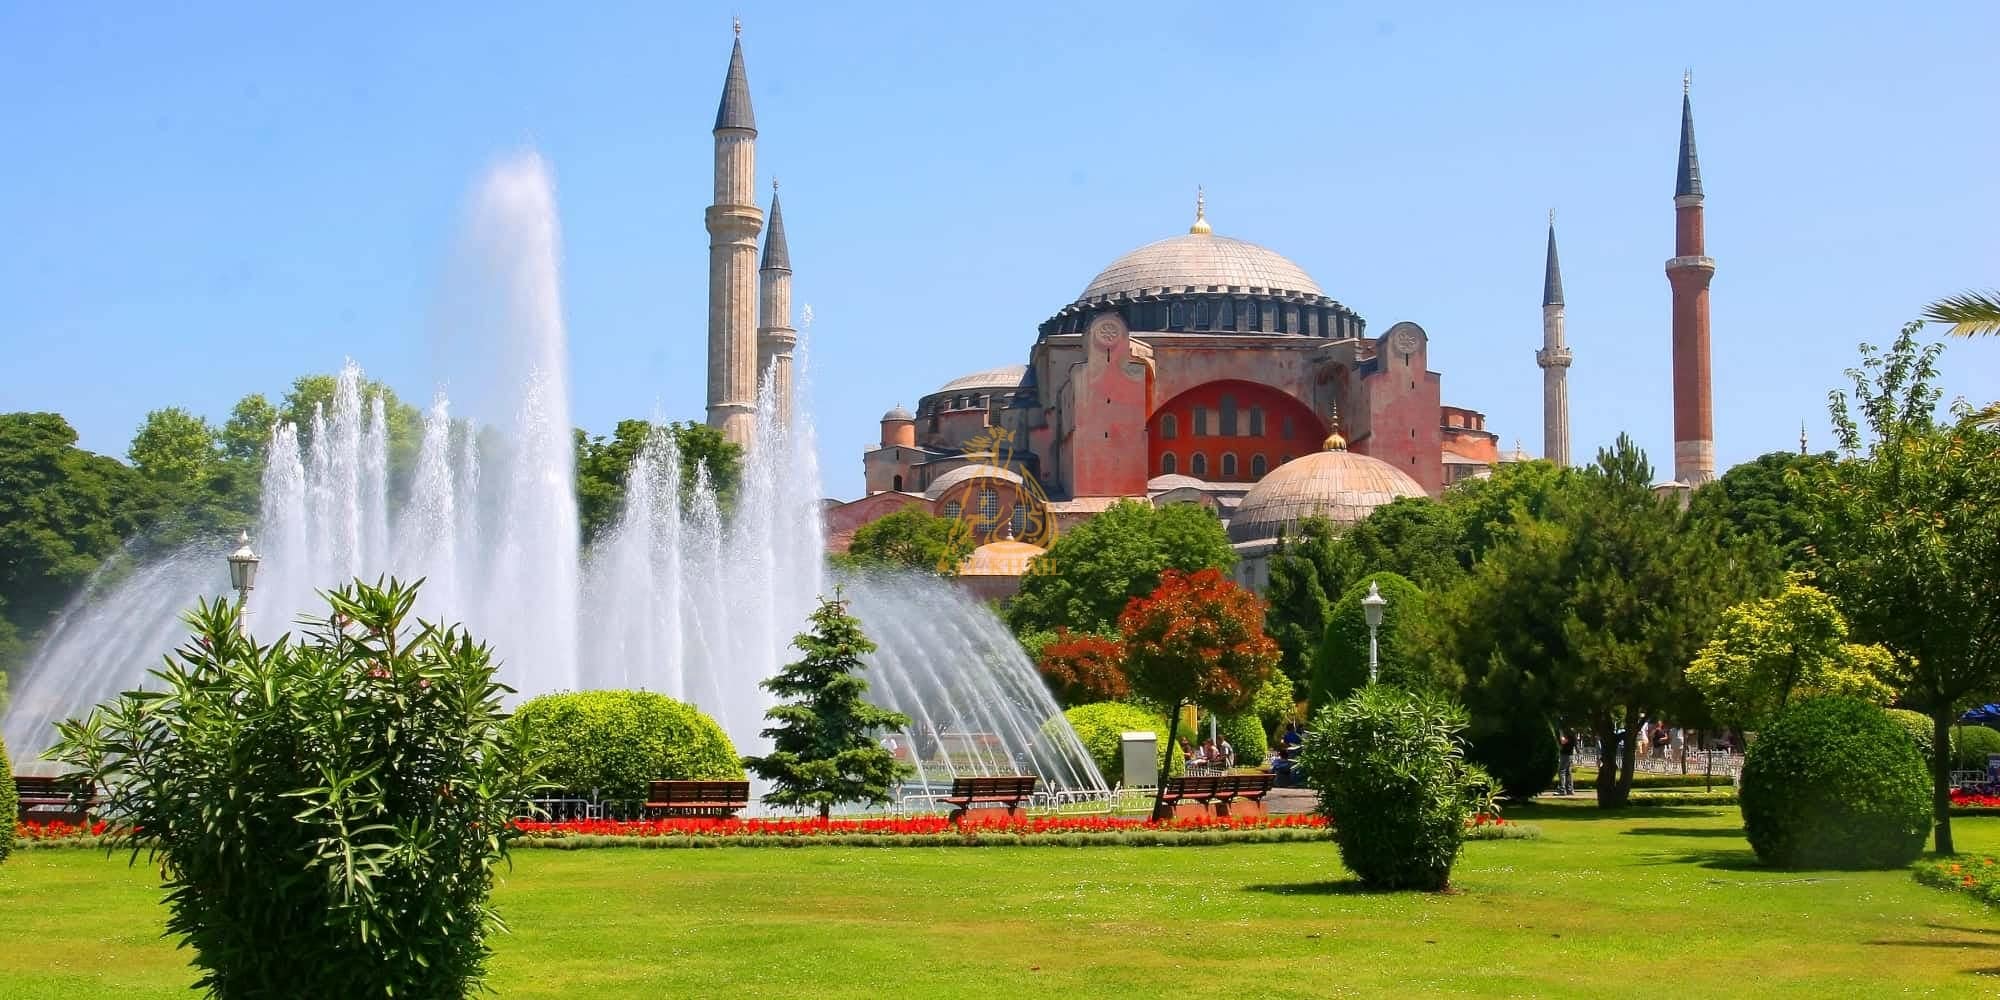 What To Do in Istanbul Europe? 25 Must-See Places in Istanbul